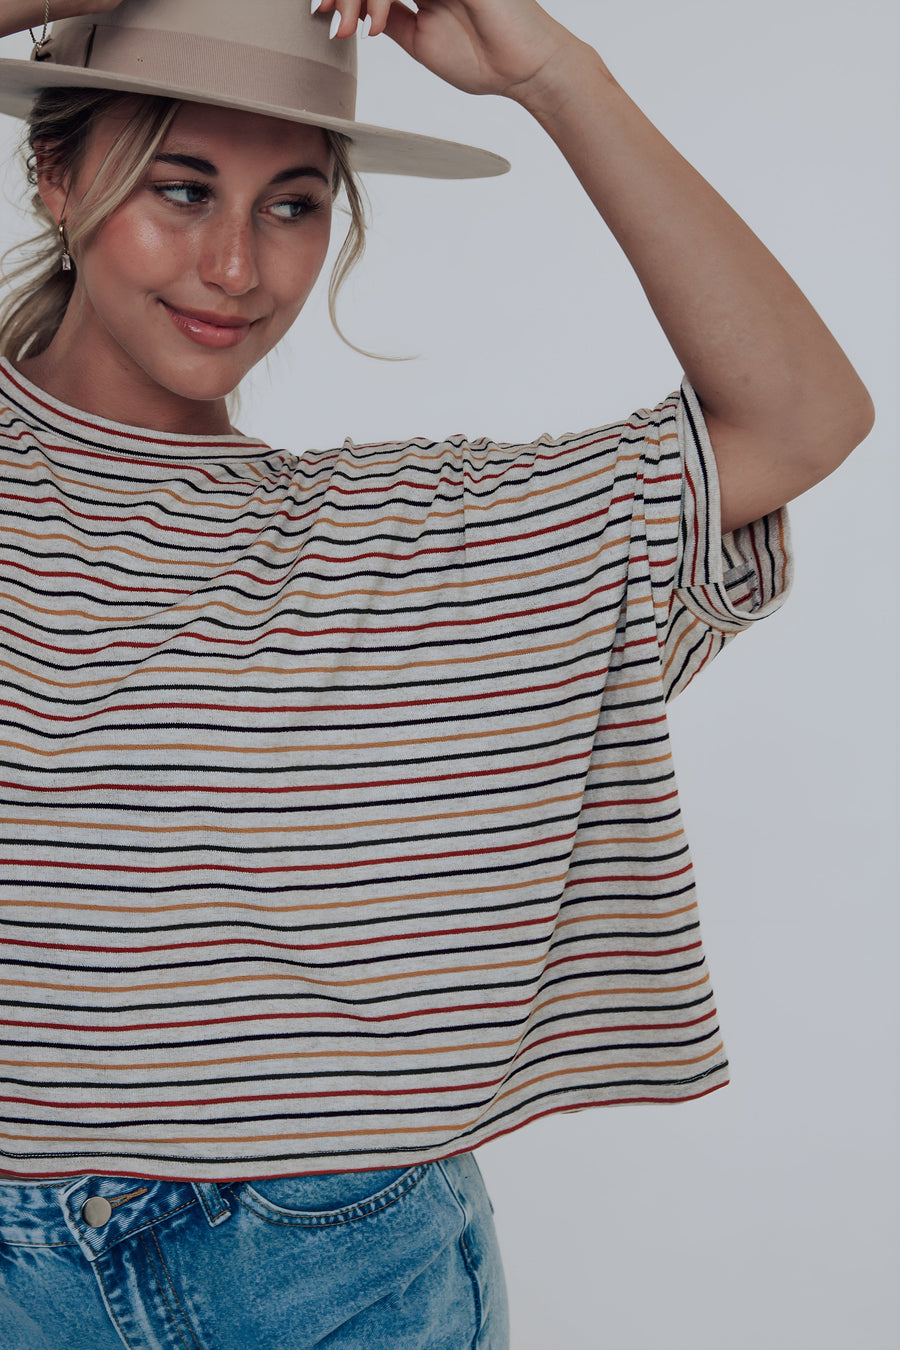 Orange, red, blue, and yellow striped oversized top